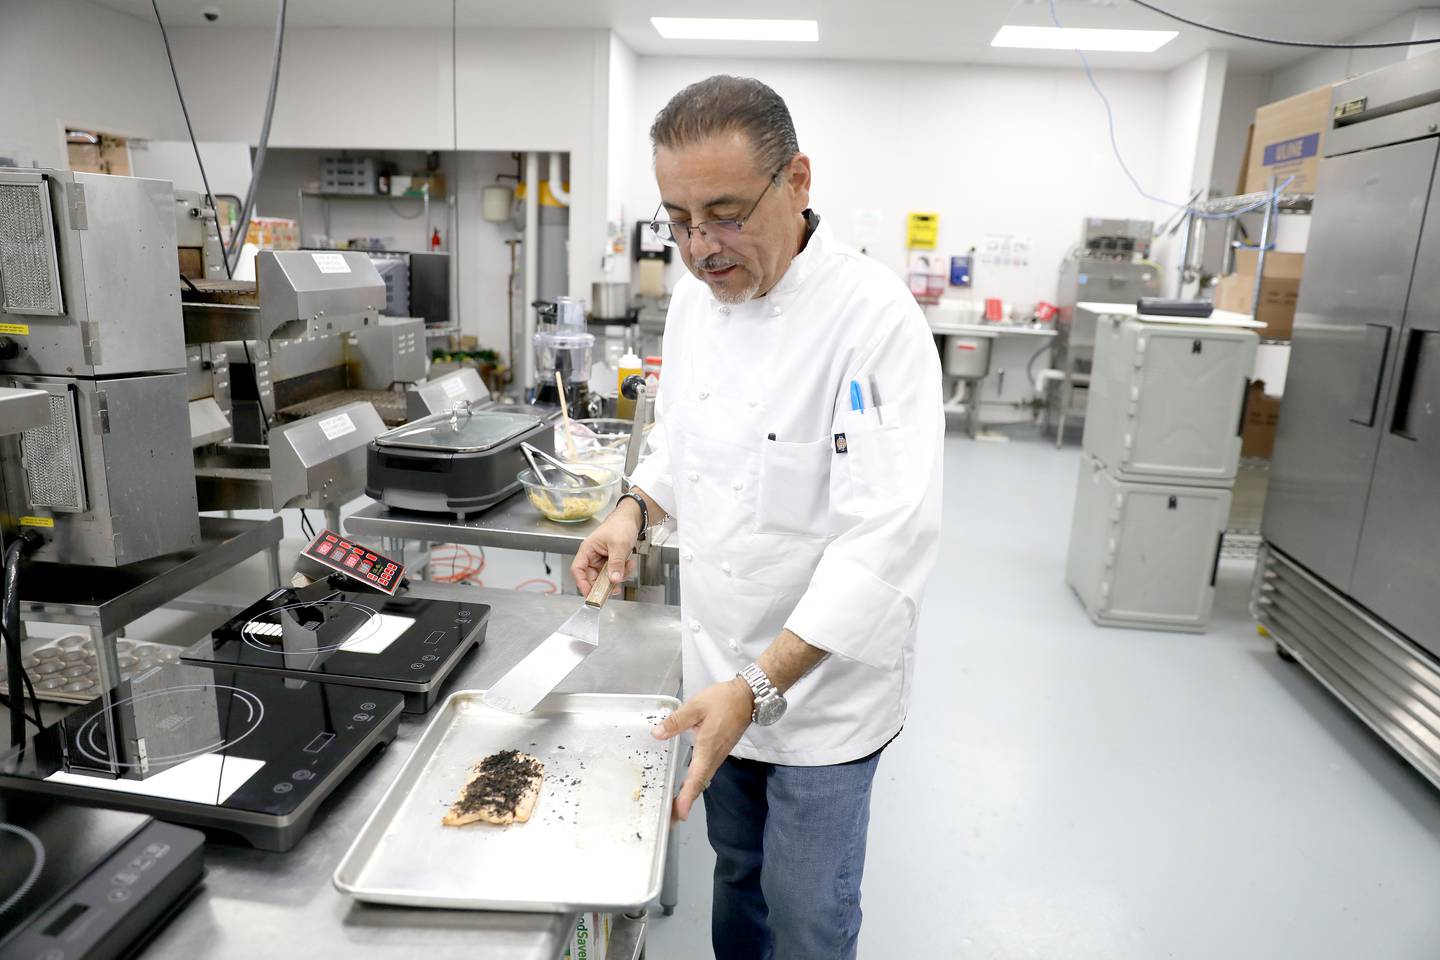 Mario Arevalo, operations manager, works in the kitchen at Keto Factory, formerly AJ Sliders, which opened in September 2020 at 2075 Prairie St., Suite 110 in St. Charles.  Keto Factory specializes in wheat-free, gluten-free, sugar-free, and soy-free foods and offers on-the-go meals as well as market produce and meal plans.